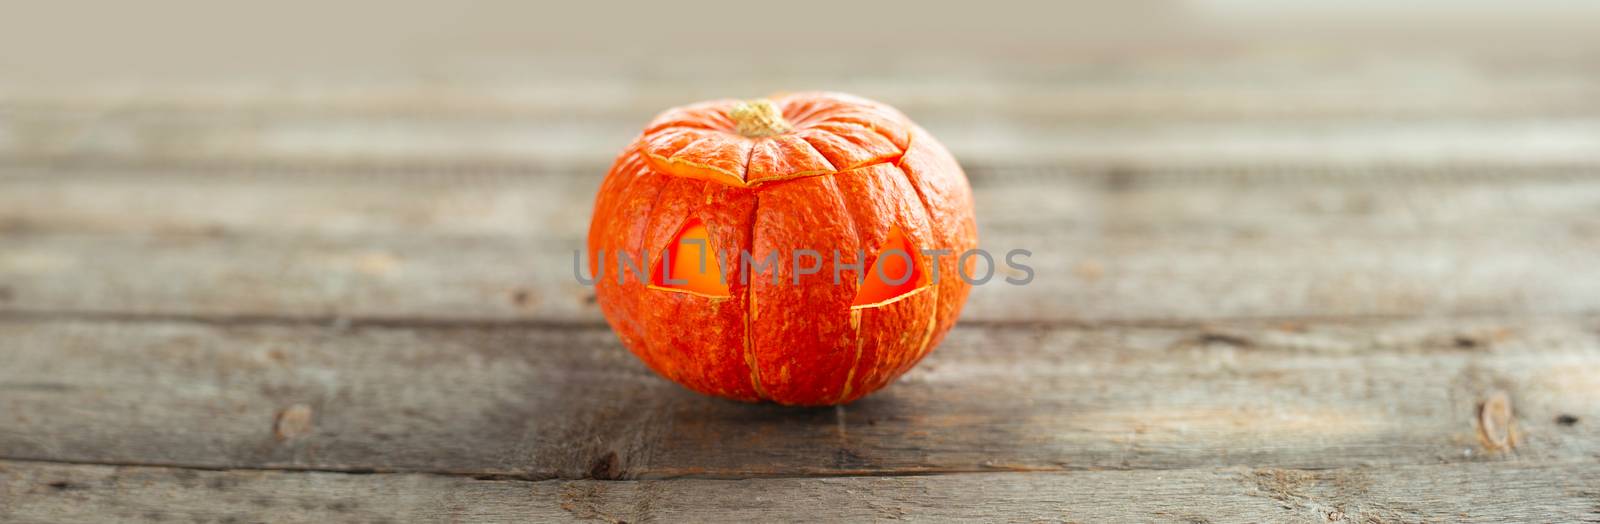 Minimalistic carved glowing Halloween pumpkin head jack lantern on wooden background with copy space gor text horizontal composition